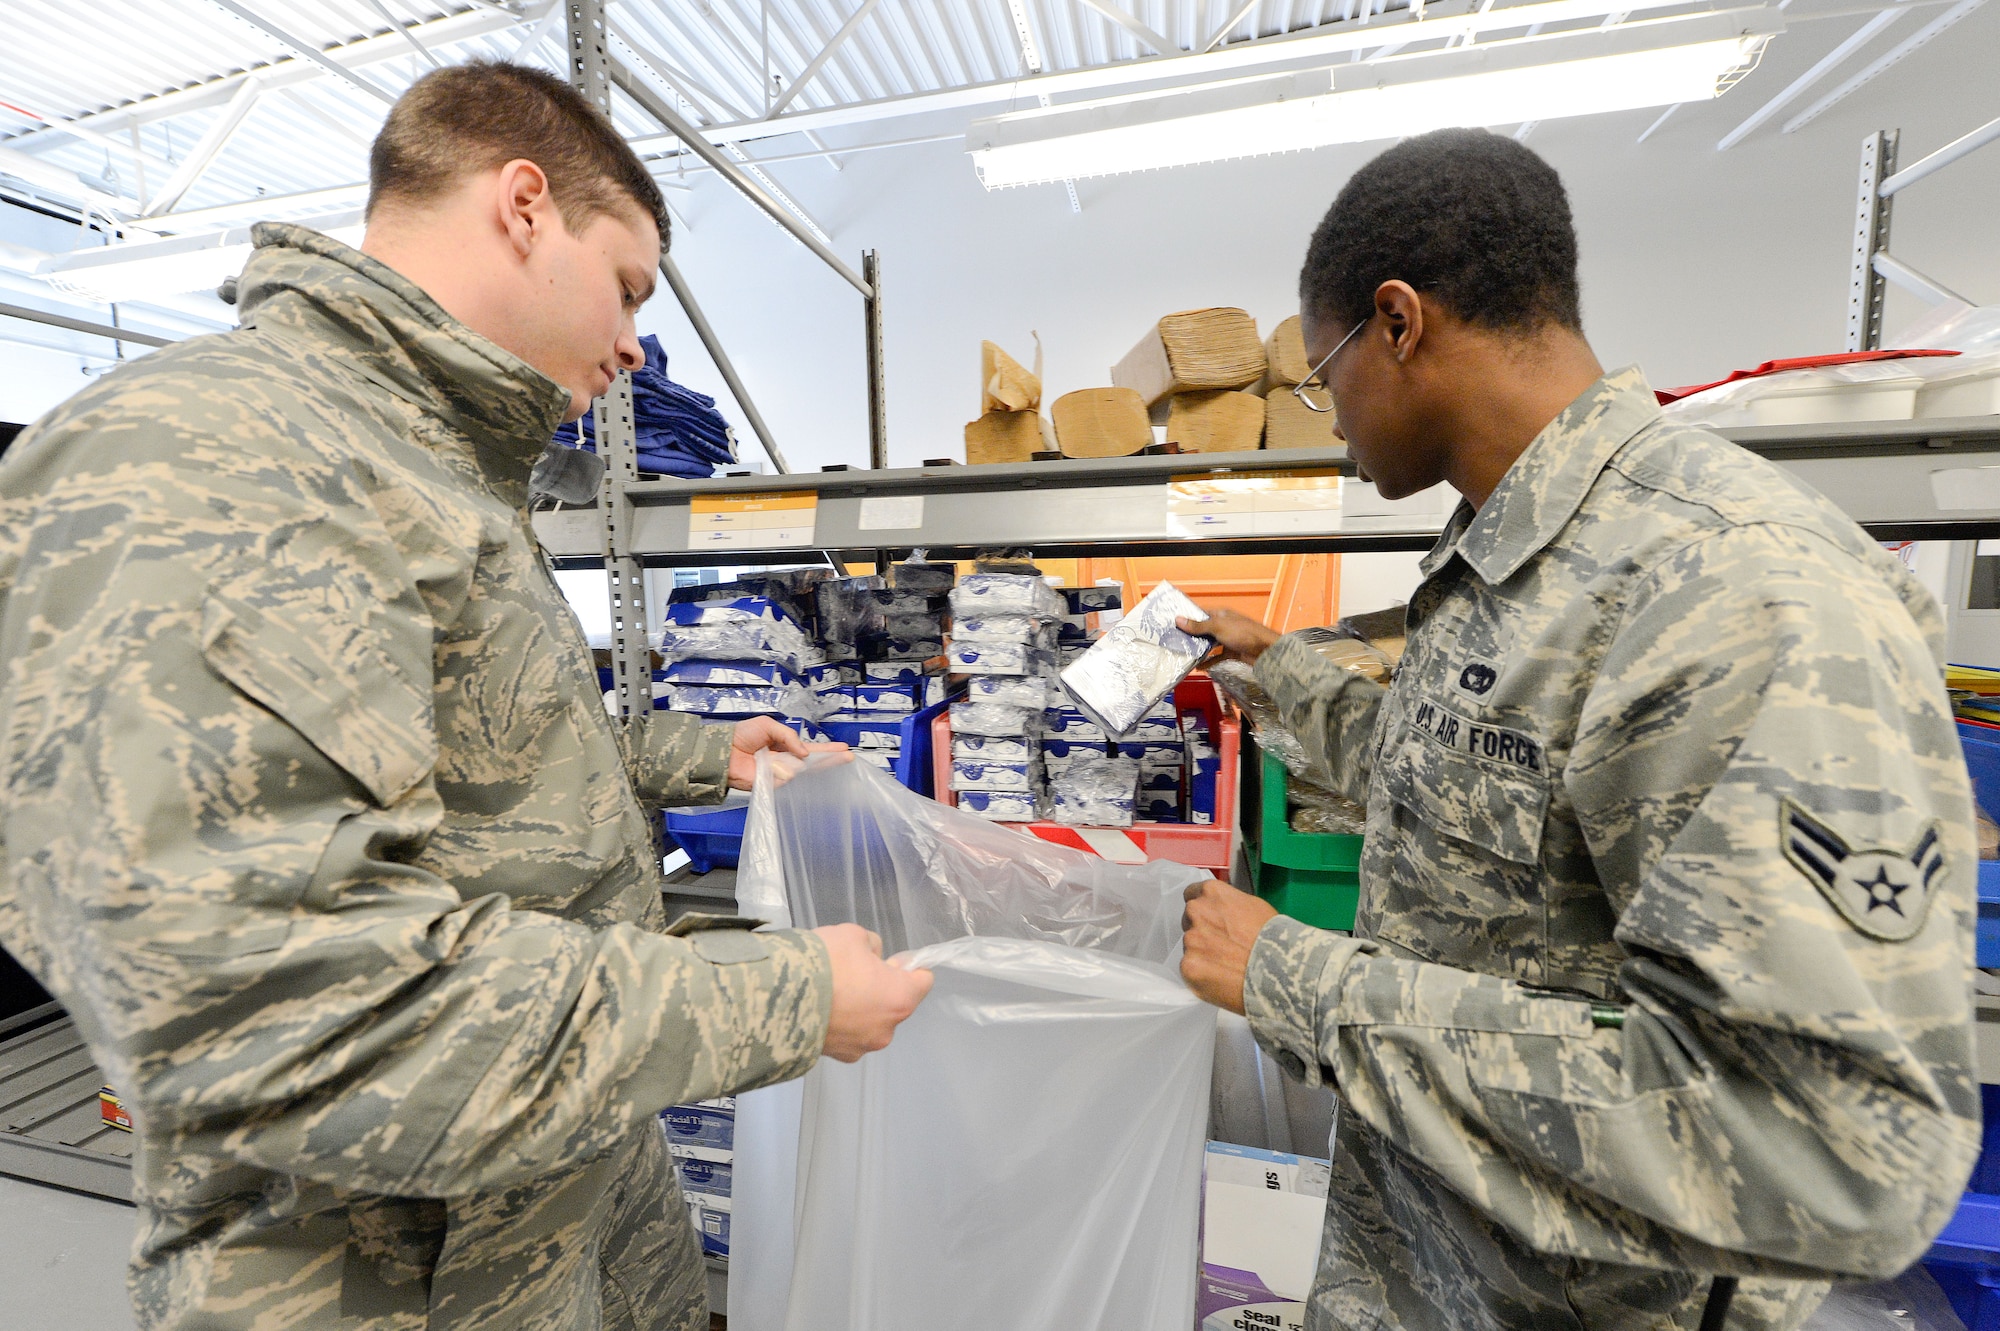 Senior Airman Noah Benefiel (left), 87th Aerial Port Squadron, Air Force Reserve Command and Airman 1st Class Brandon Walker, 436th Aerial Port Squadron, place consumable items in to a large bag to service an outgoing C-5M Super Galaxy flight from the 436th Airlift Wing, Dover Air Force Base, Del. The 436th Aerial Port Squadron, clean fleet services section, works out of the passenger terminal and is shown in-action March 28, 2013. (U.S. Air Force photo/Greg L. Davis)